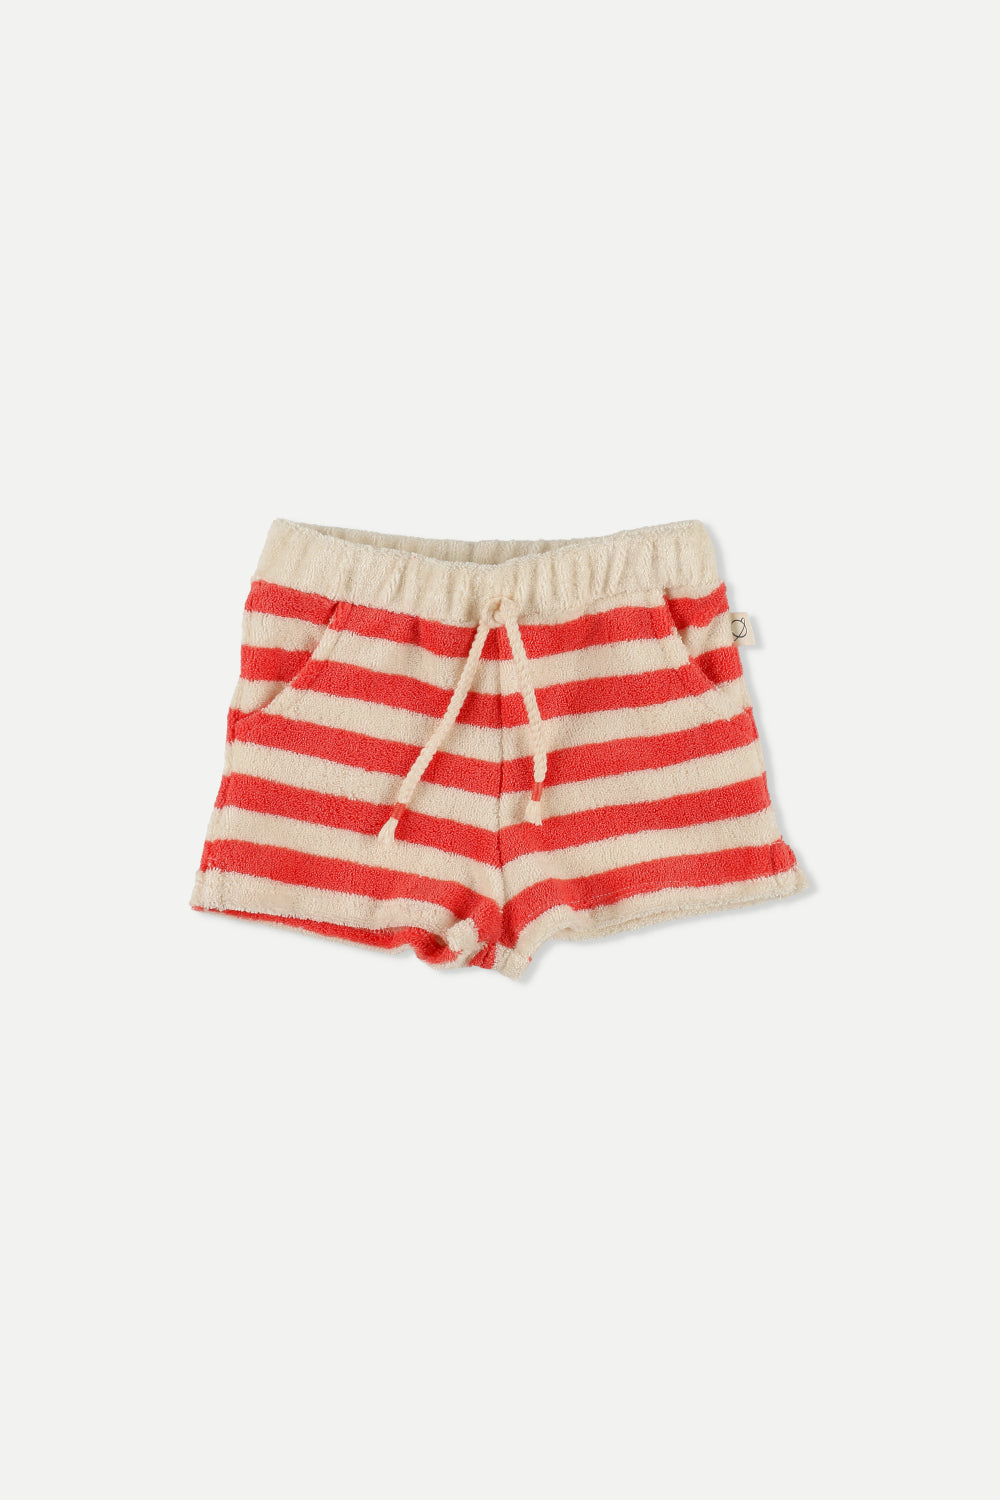 My little cozmo - mayles269 - terry stripes shorts - ruby